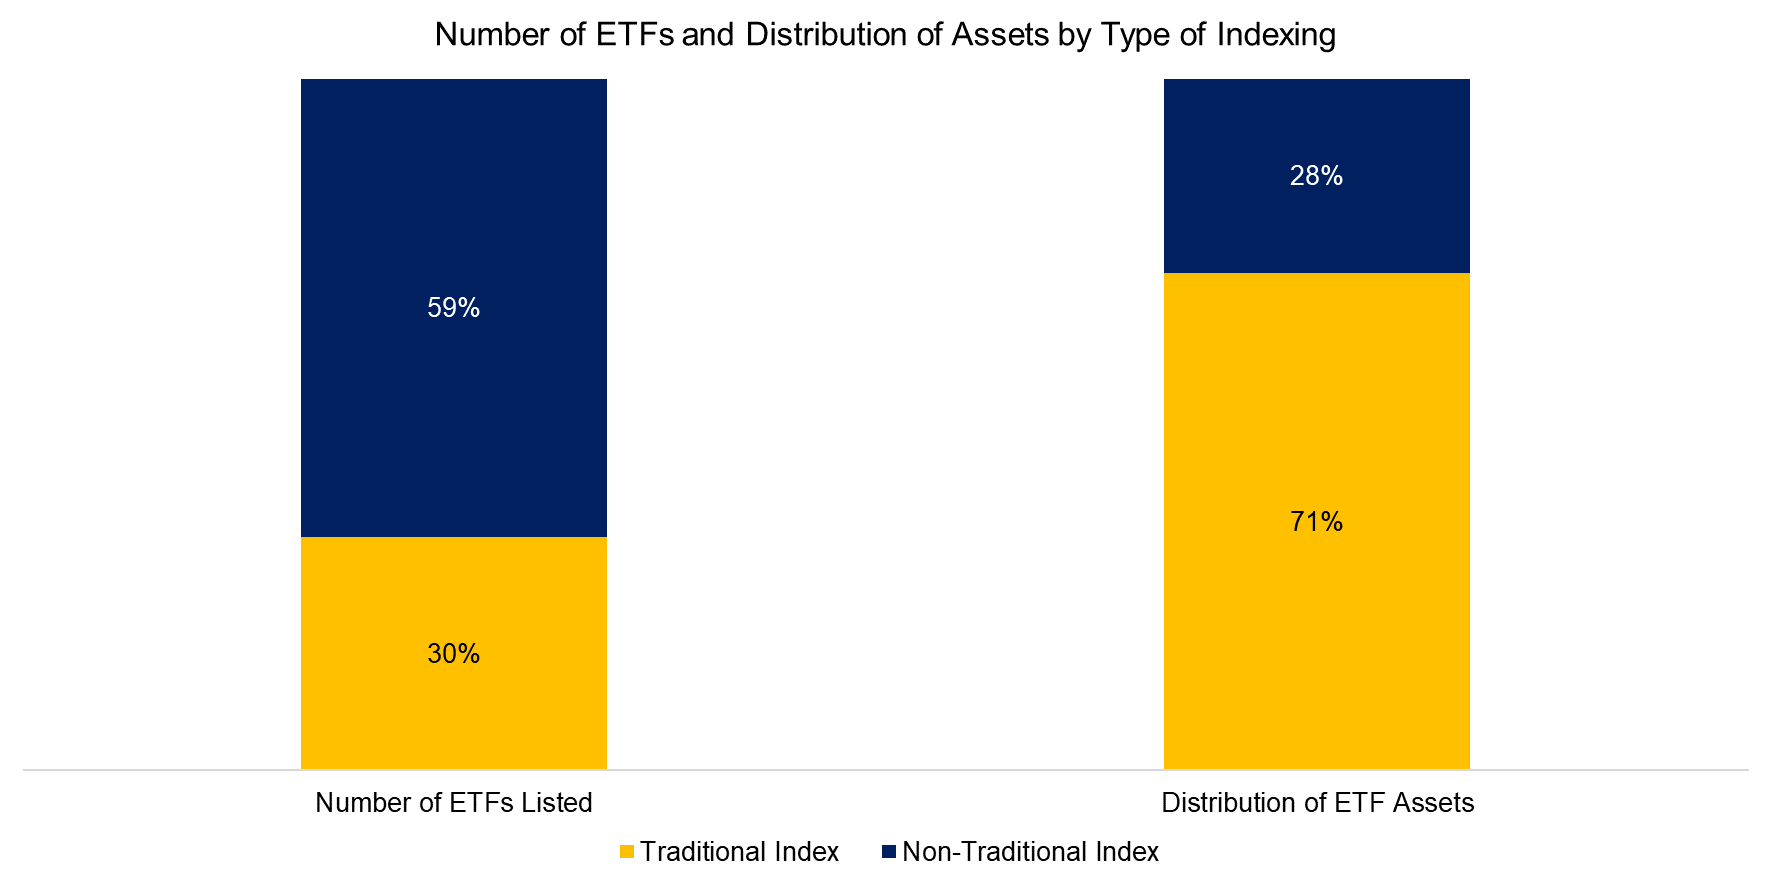 Number of ETFs and Distribution of Assets by Type of Indexing